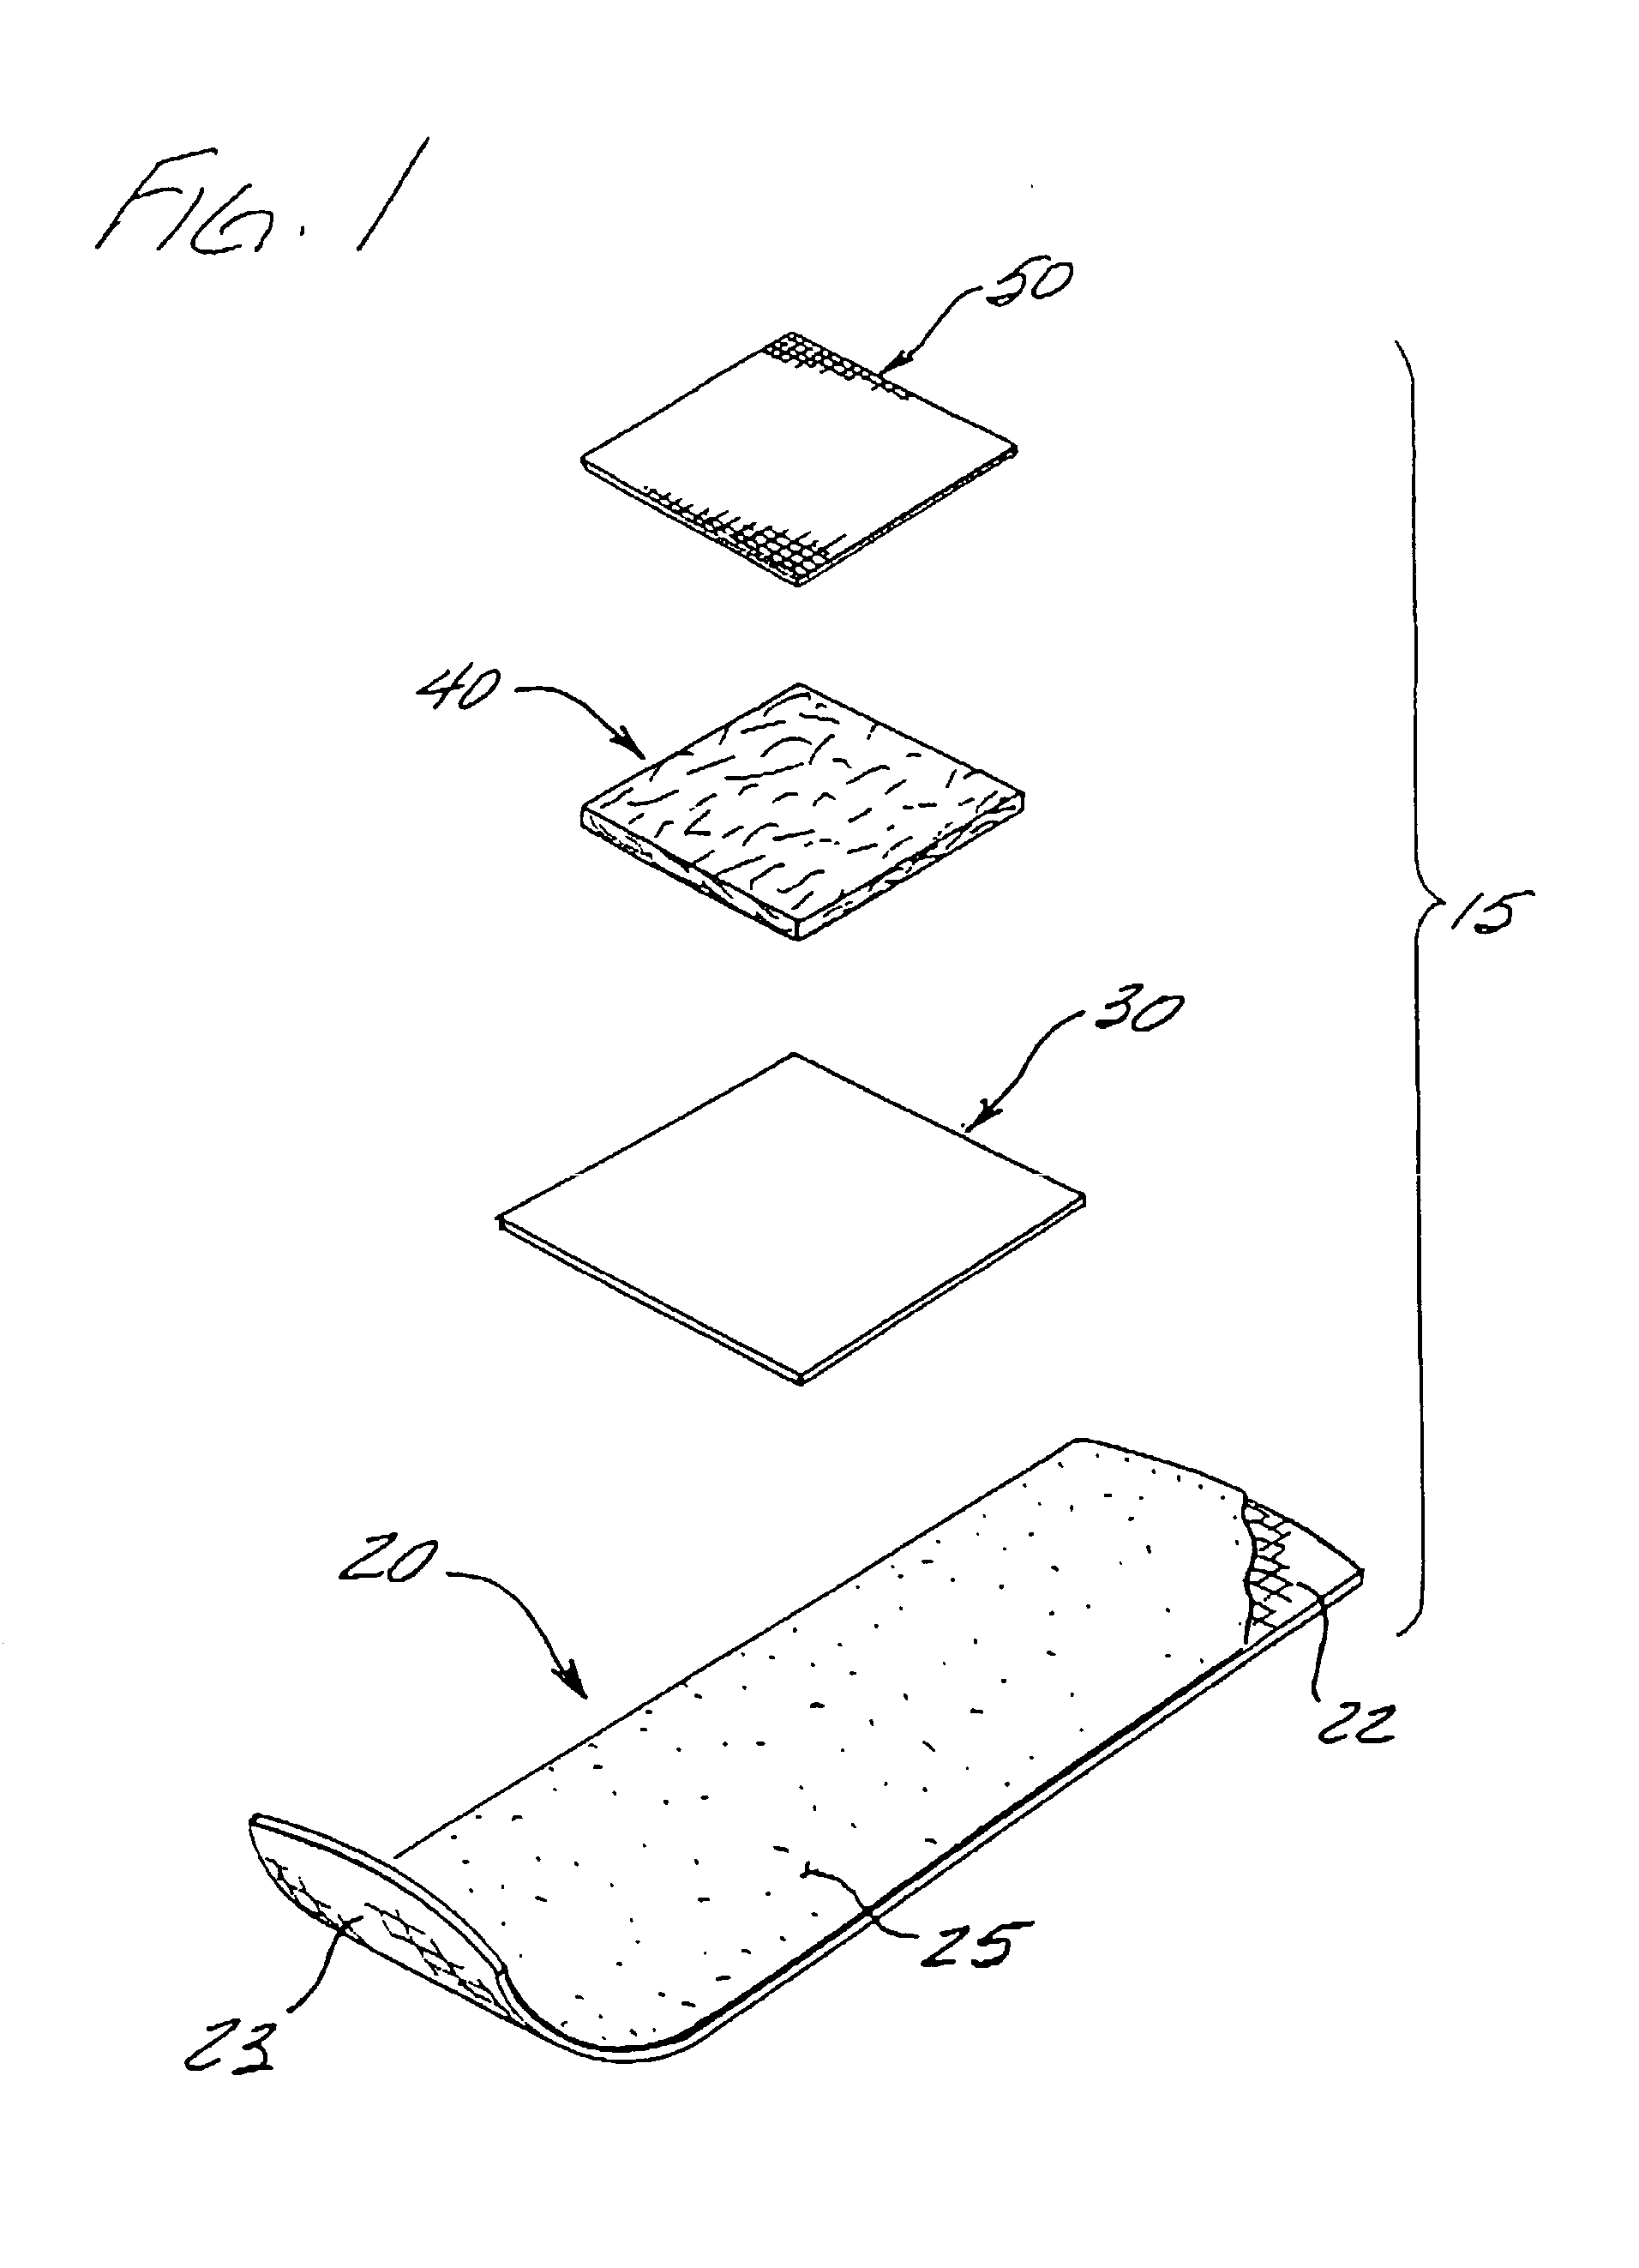 Adhesive bandage having a selectively placed layer